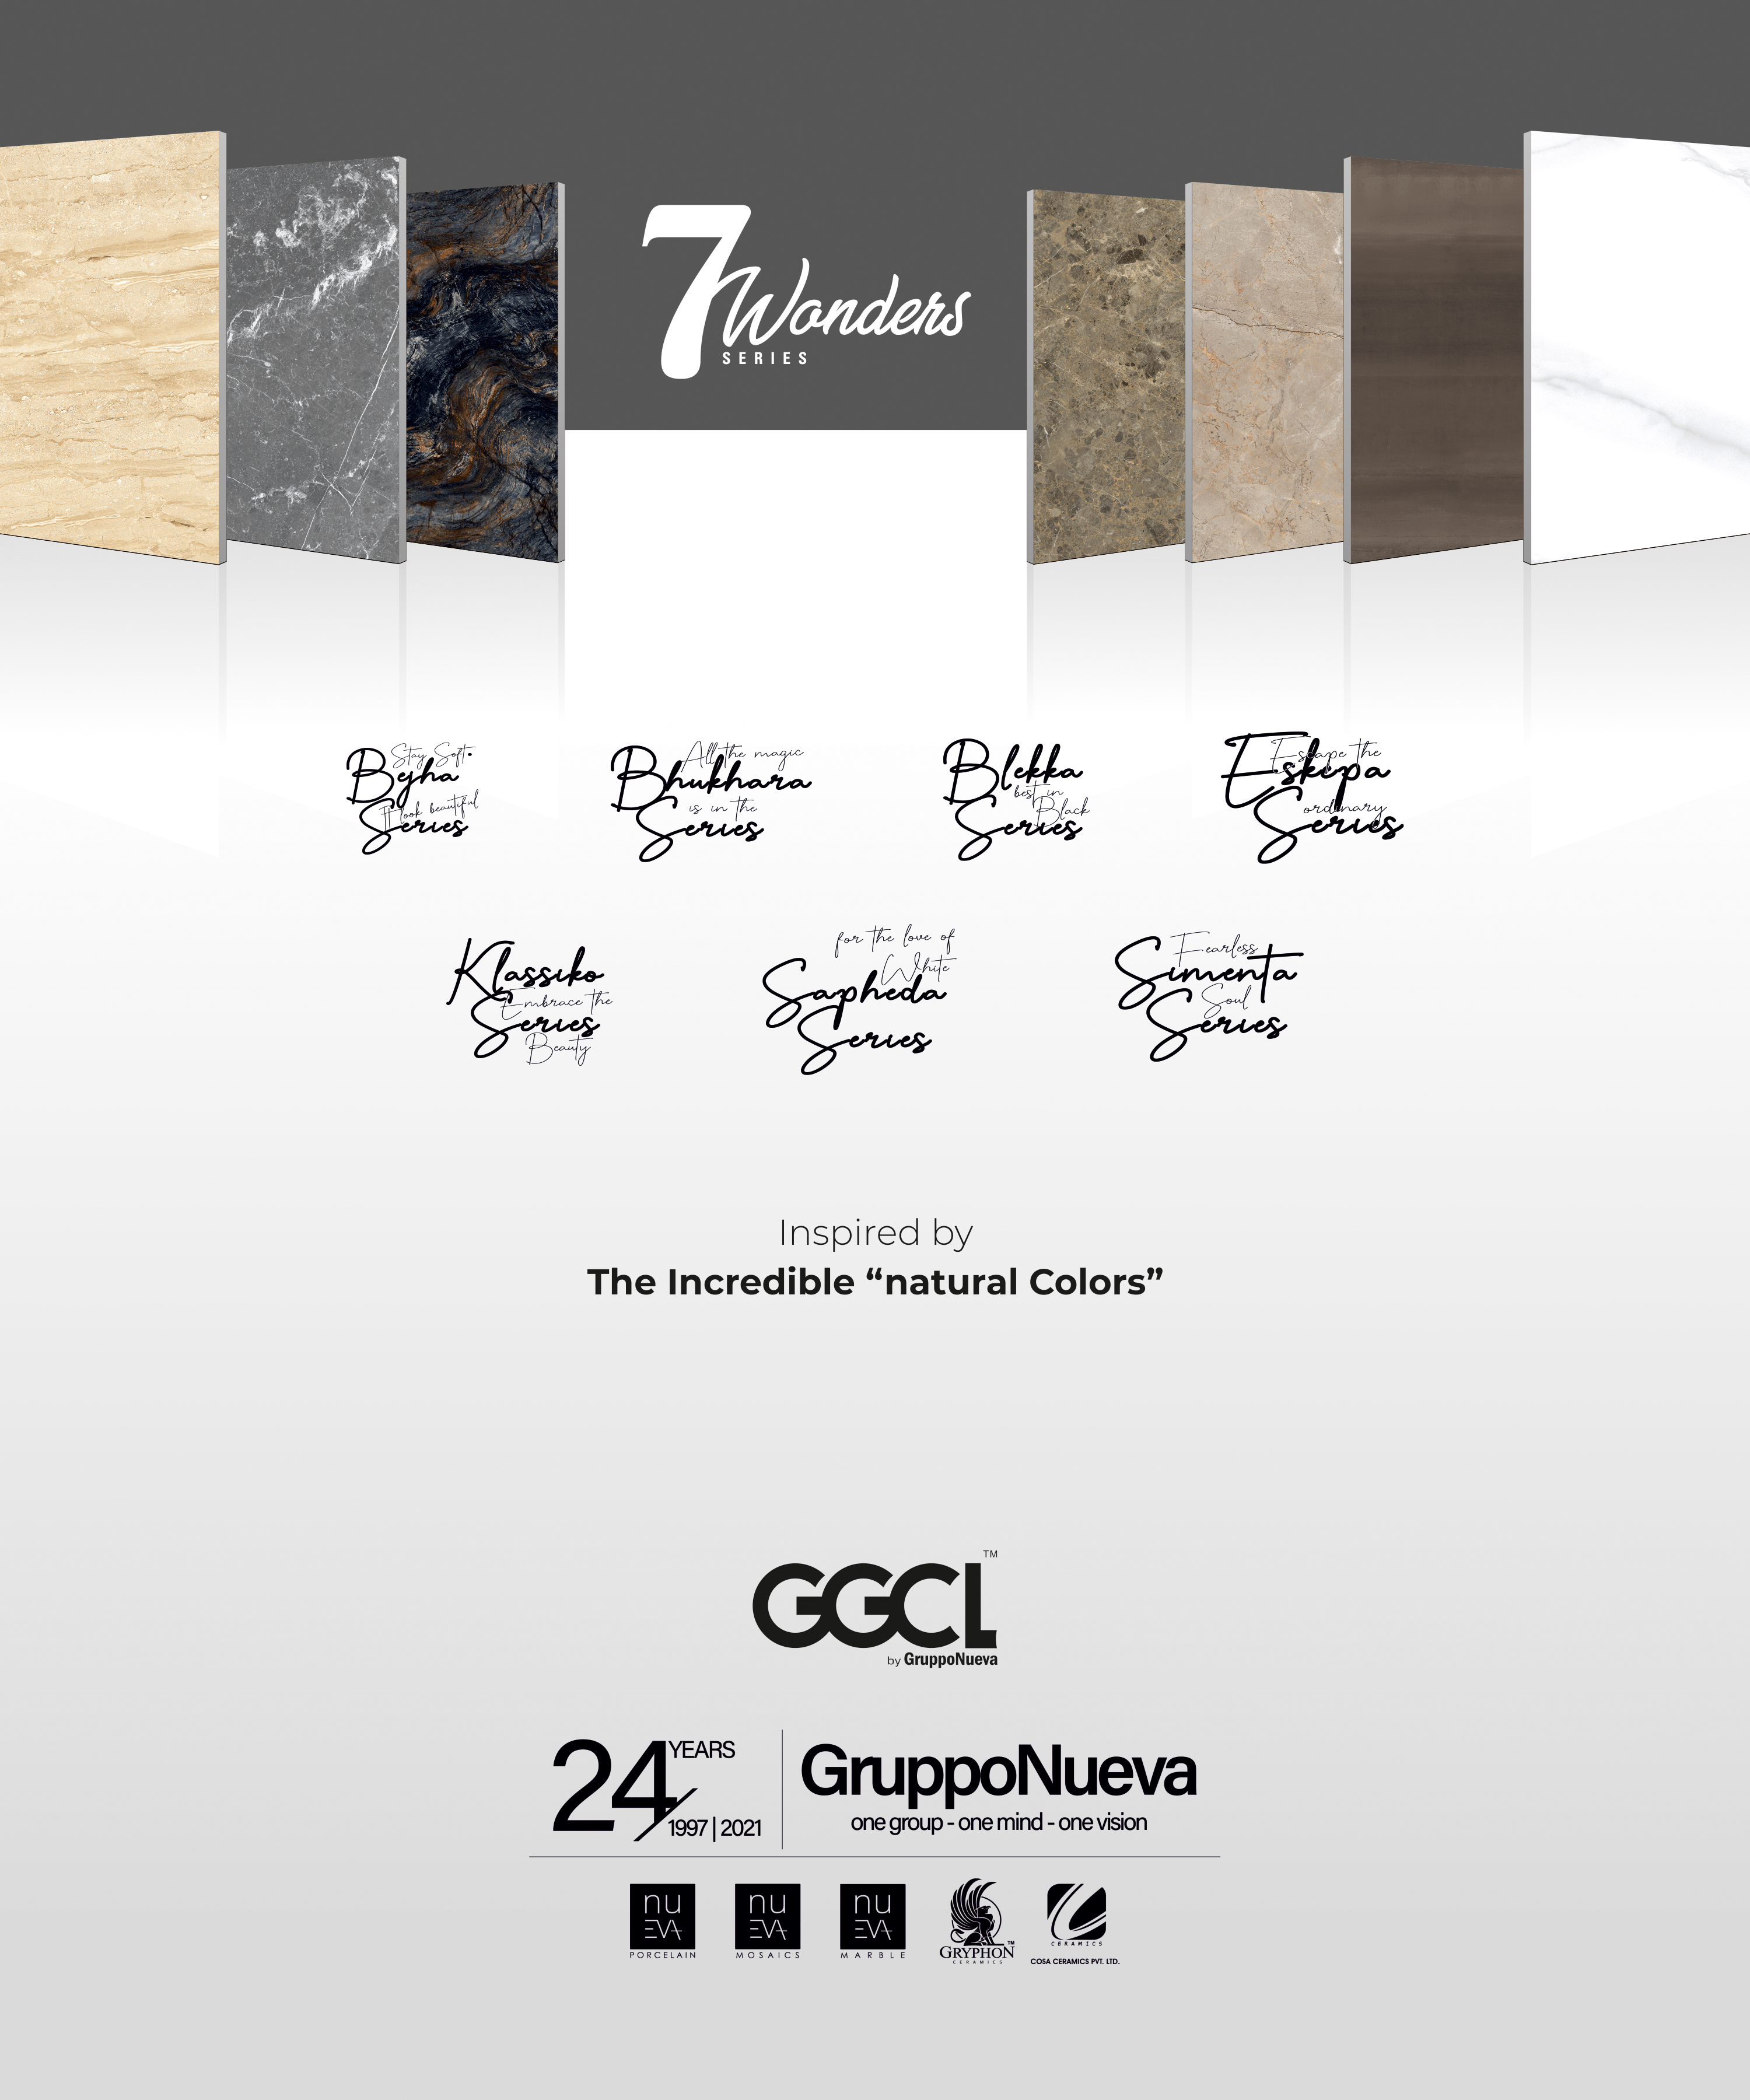 7 Wonder Series Collections By GGCL Ethos Of Marbles Harmonized With Porcelain Tiles